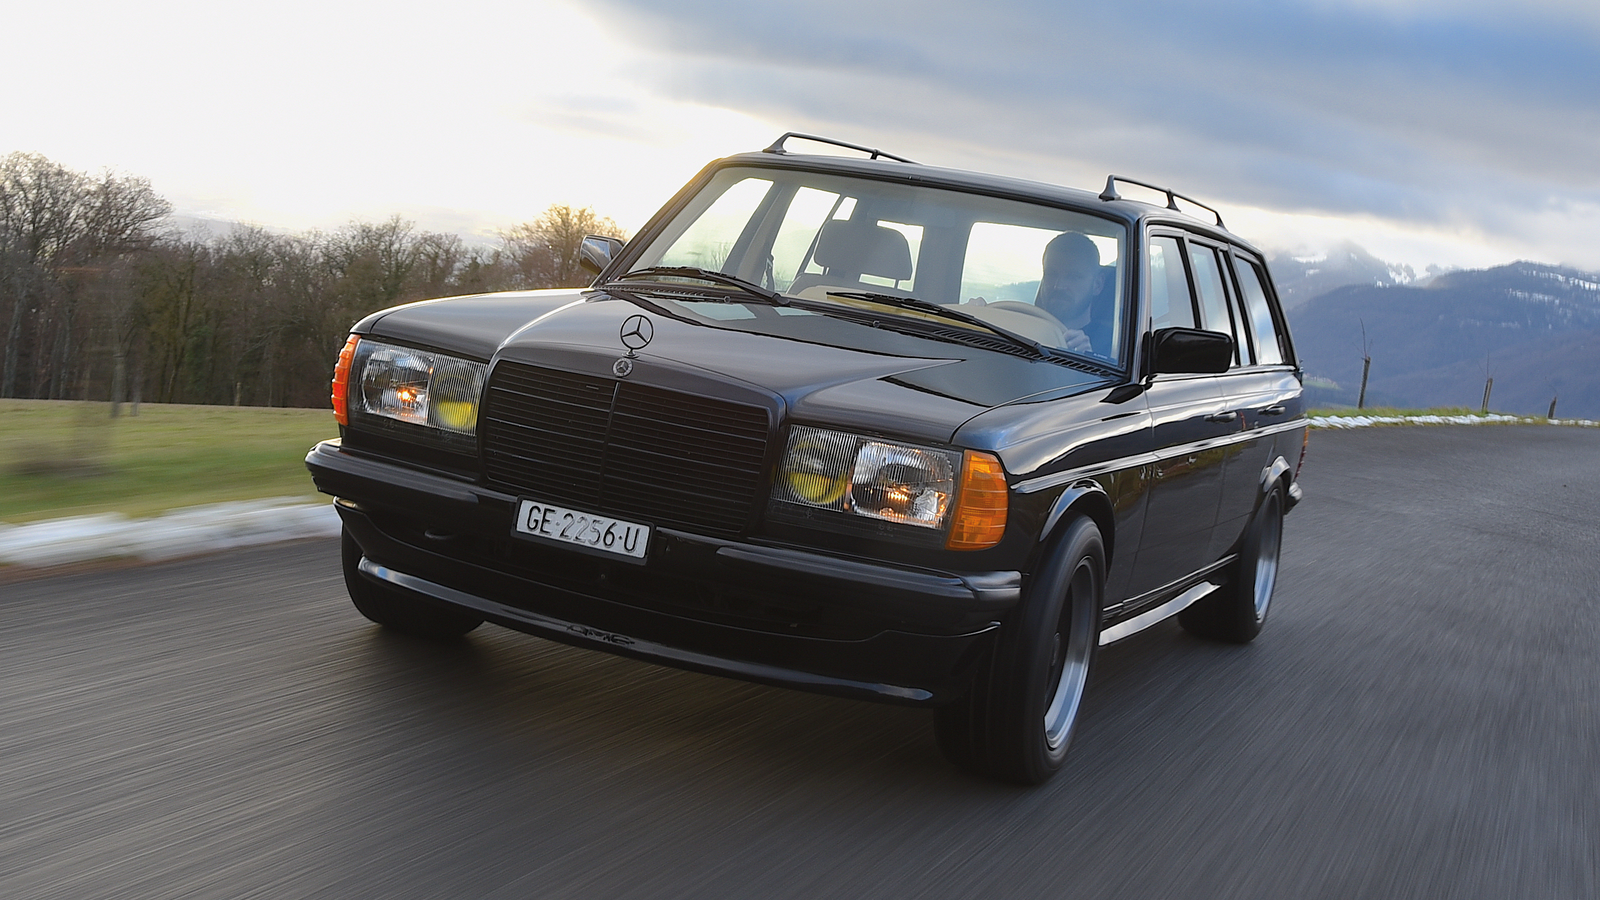 The fastest and wildest classic estate cars